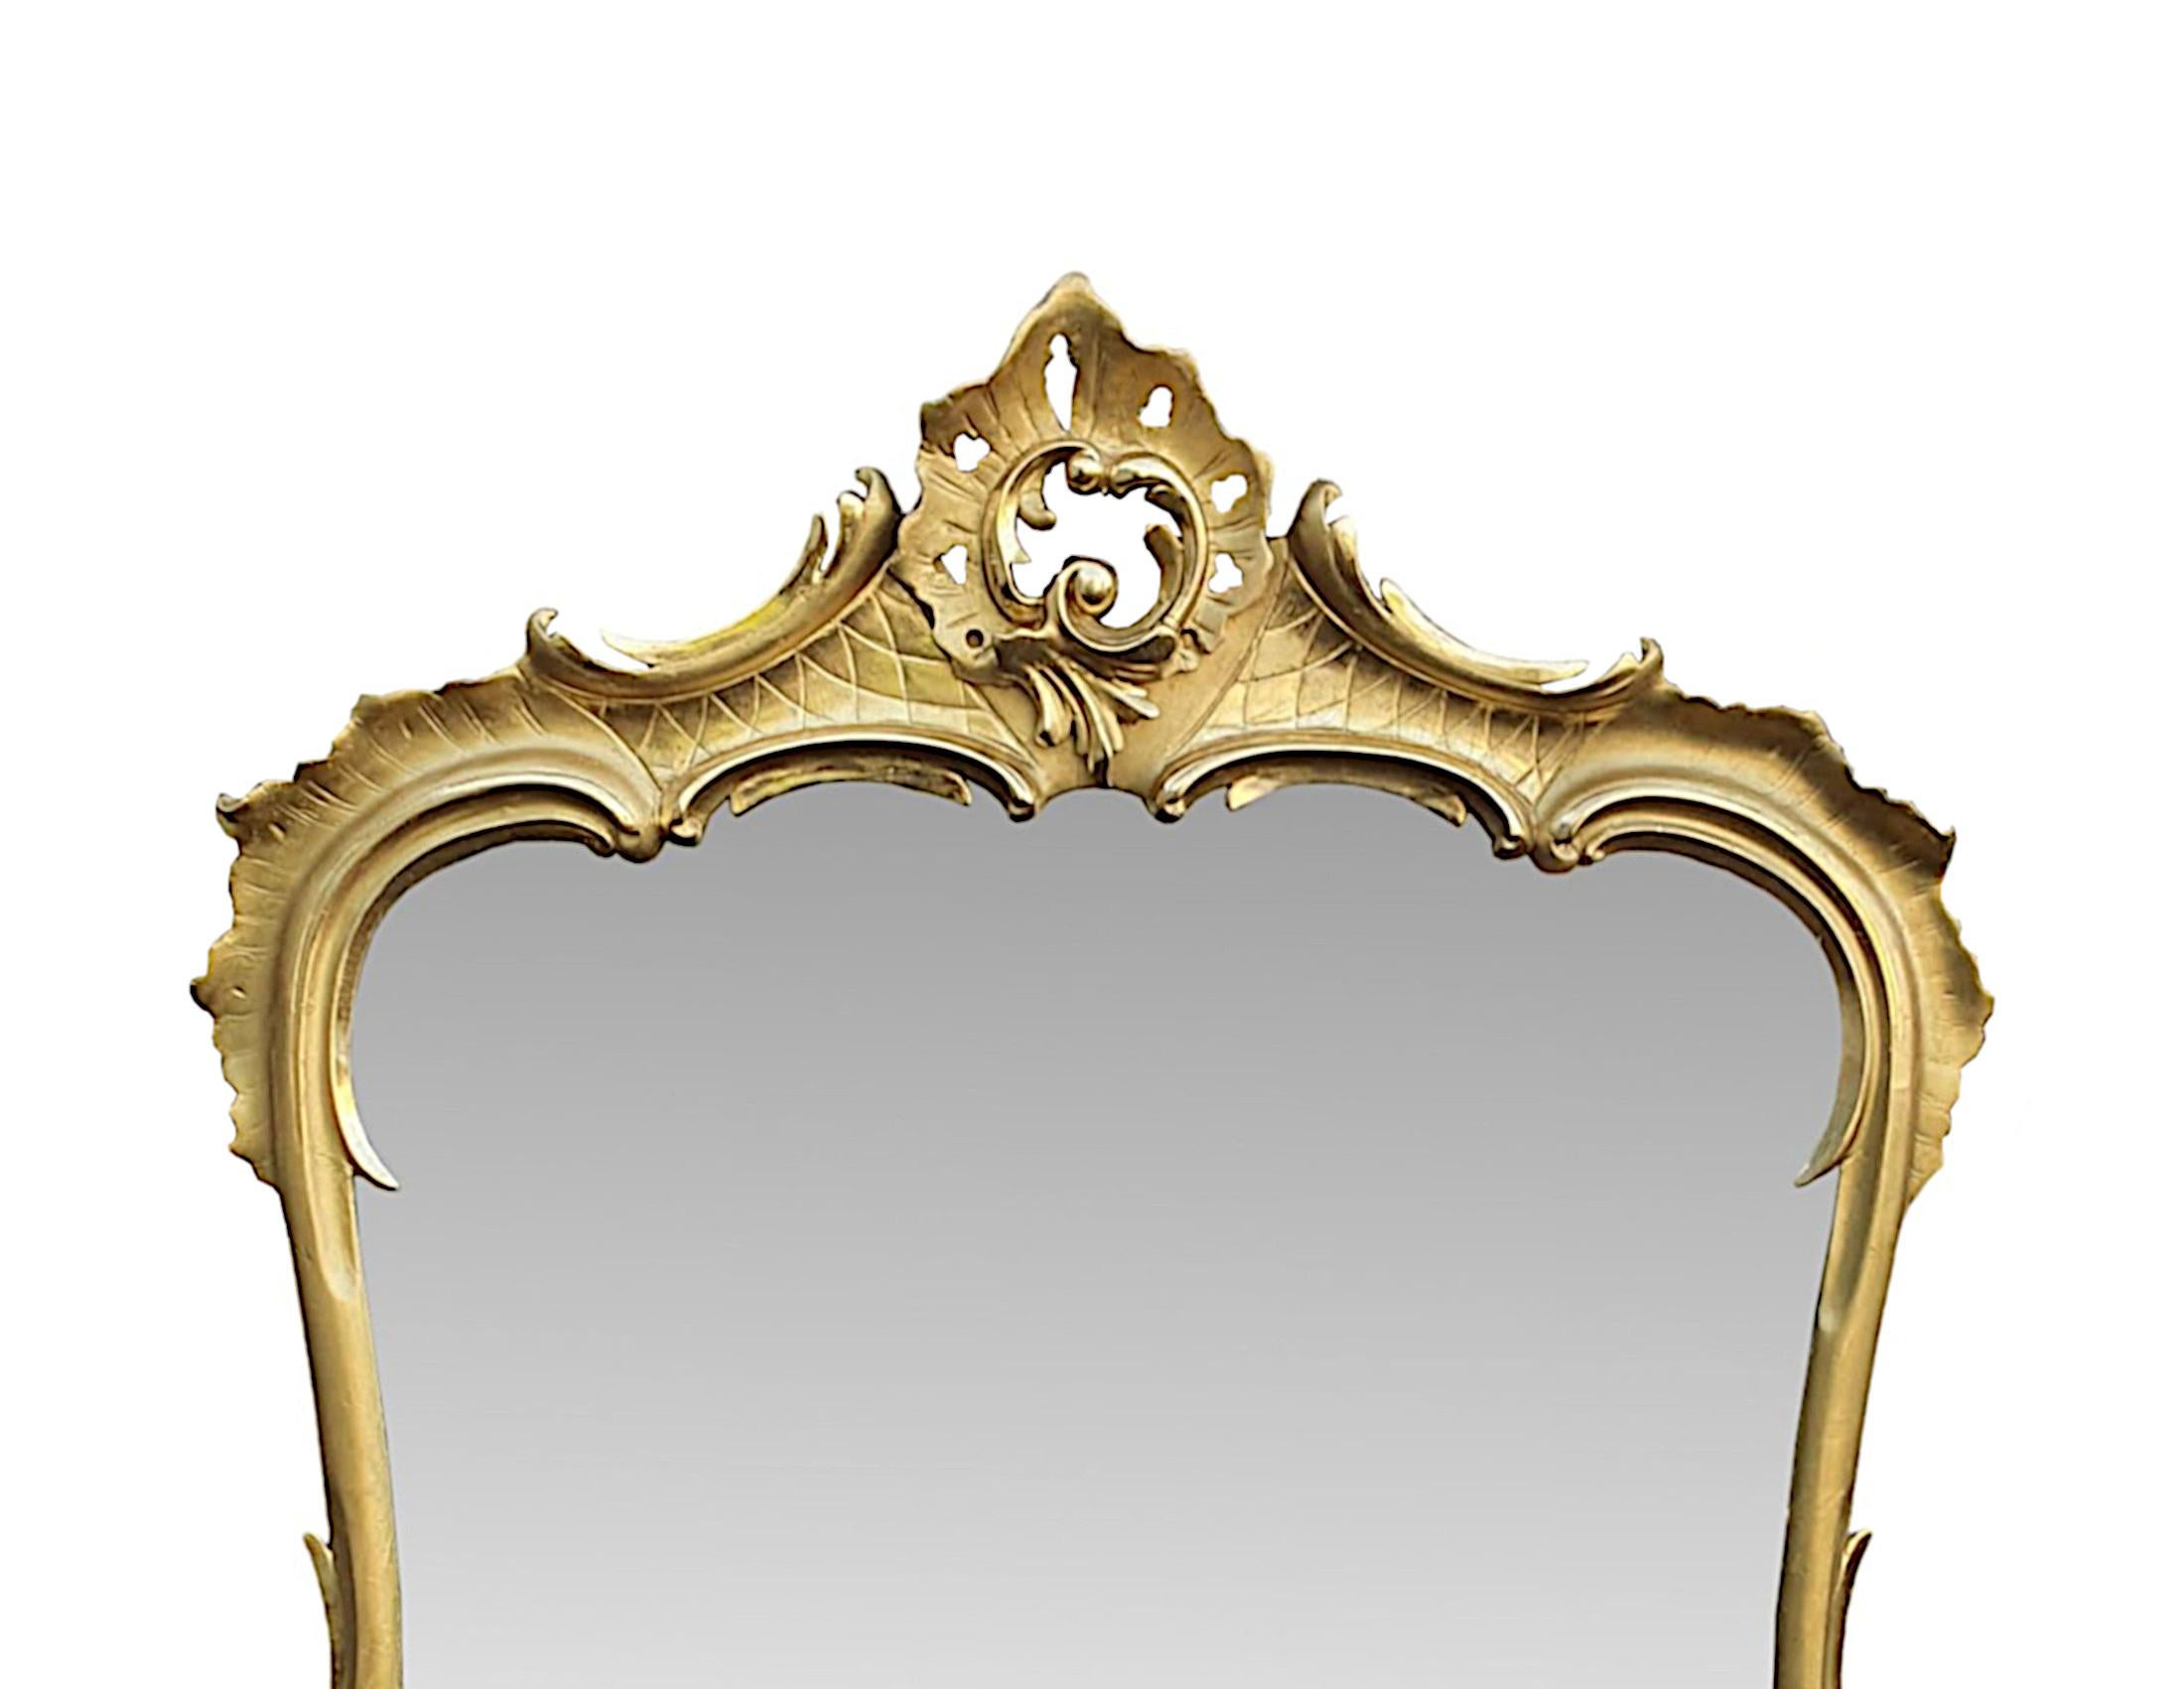 A superb 19th century giltwood overmantle mirror of large proportions. The original mercury glass plate with some mottling, is set within a beautifully shaped giltwood frame of rectangular form. The finely hand carved, moulded frame is richly